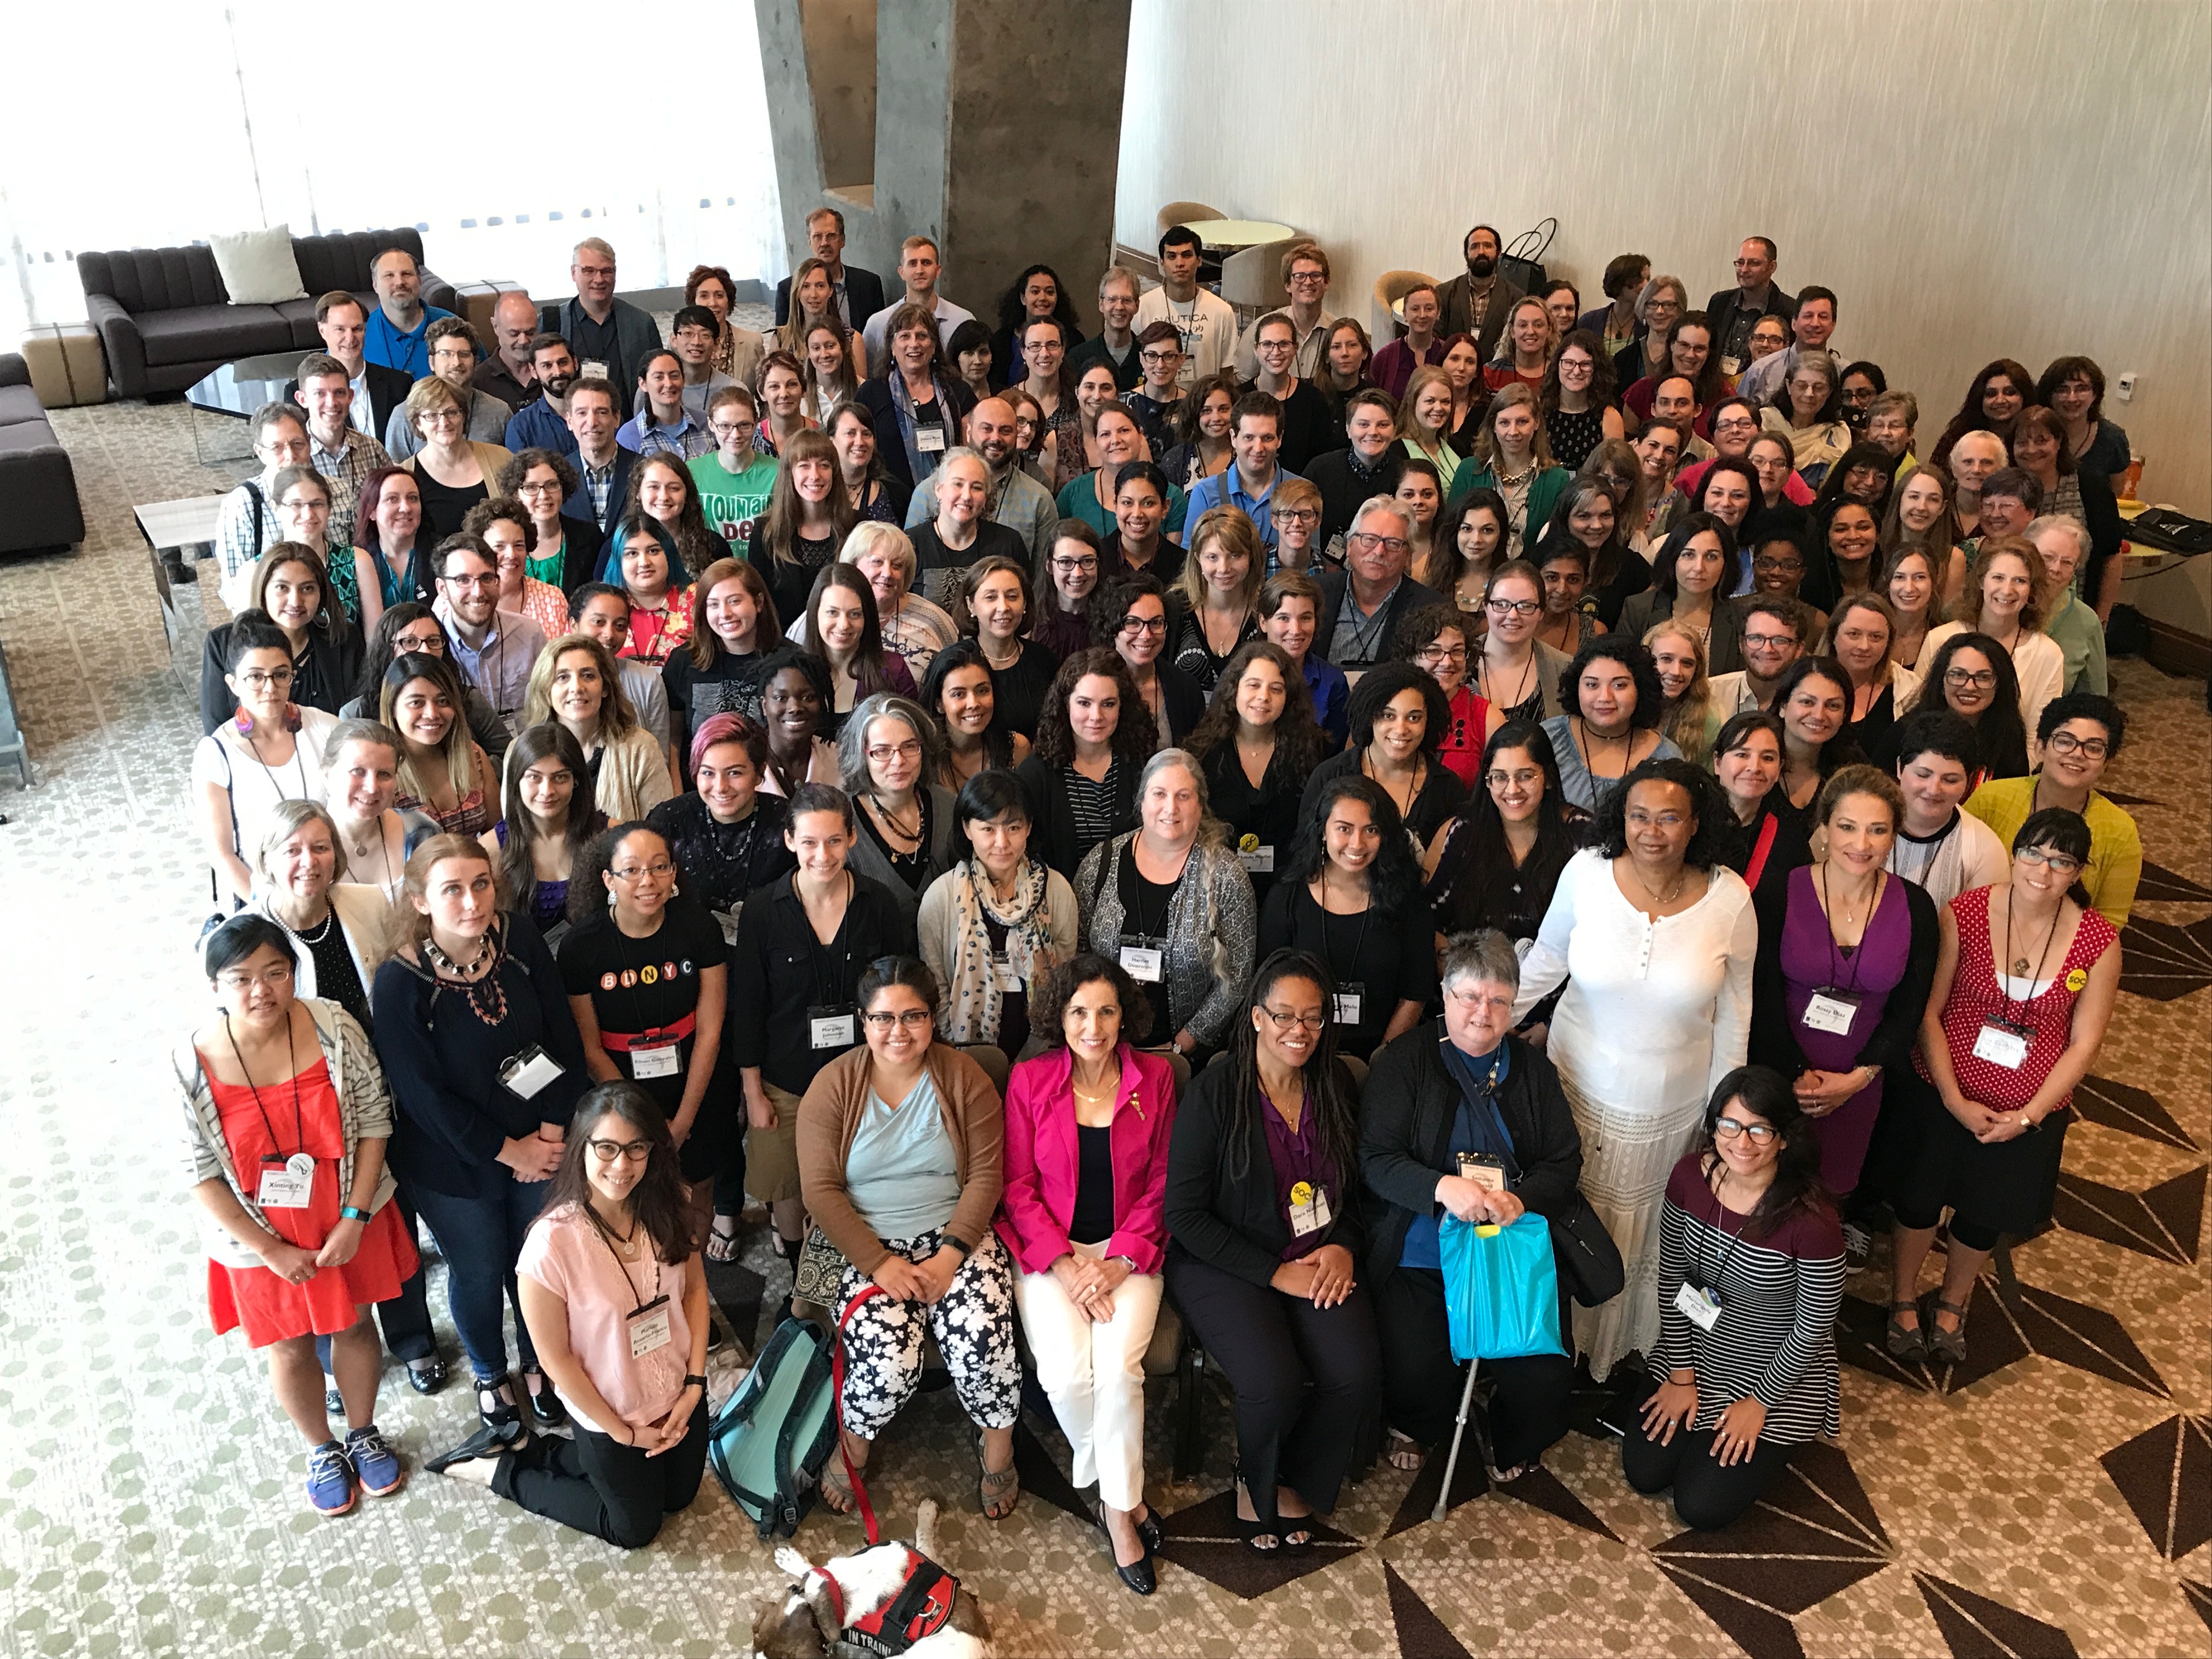 Women in Astronomy attendees